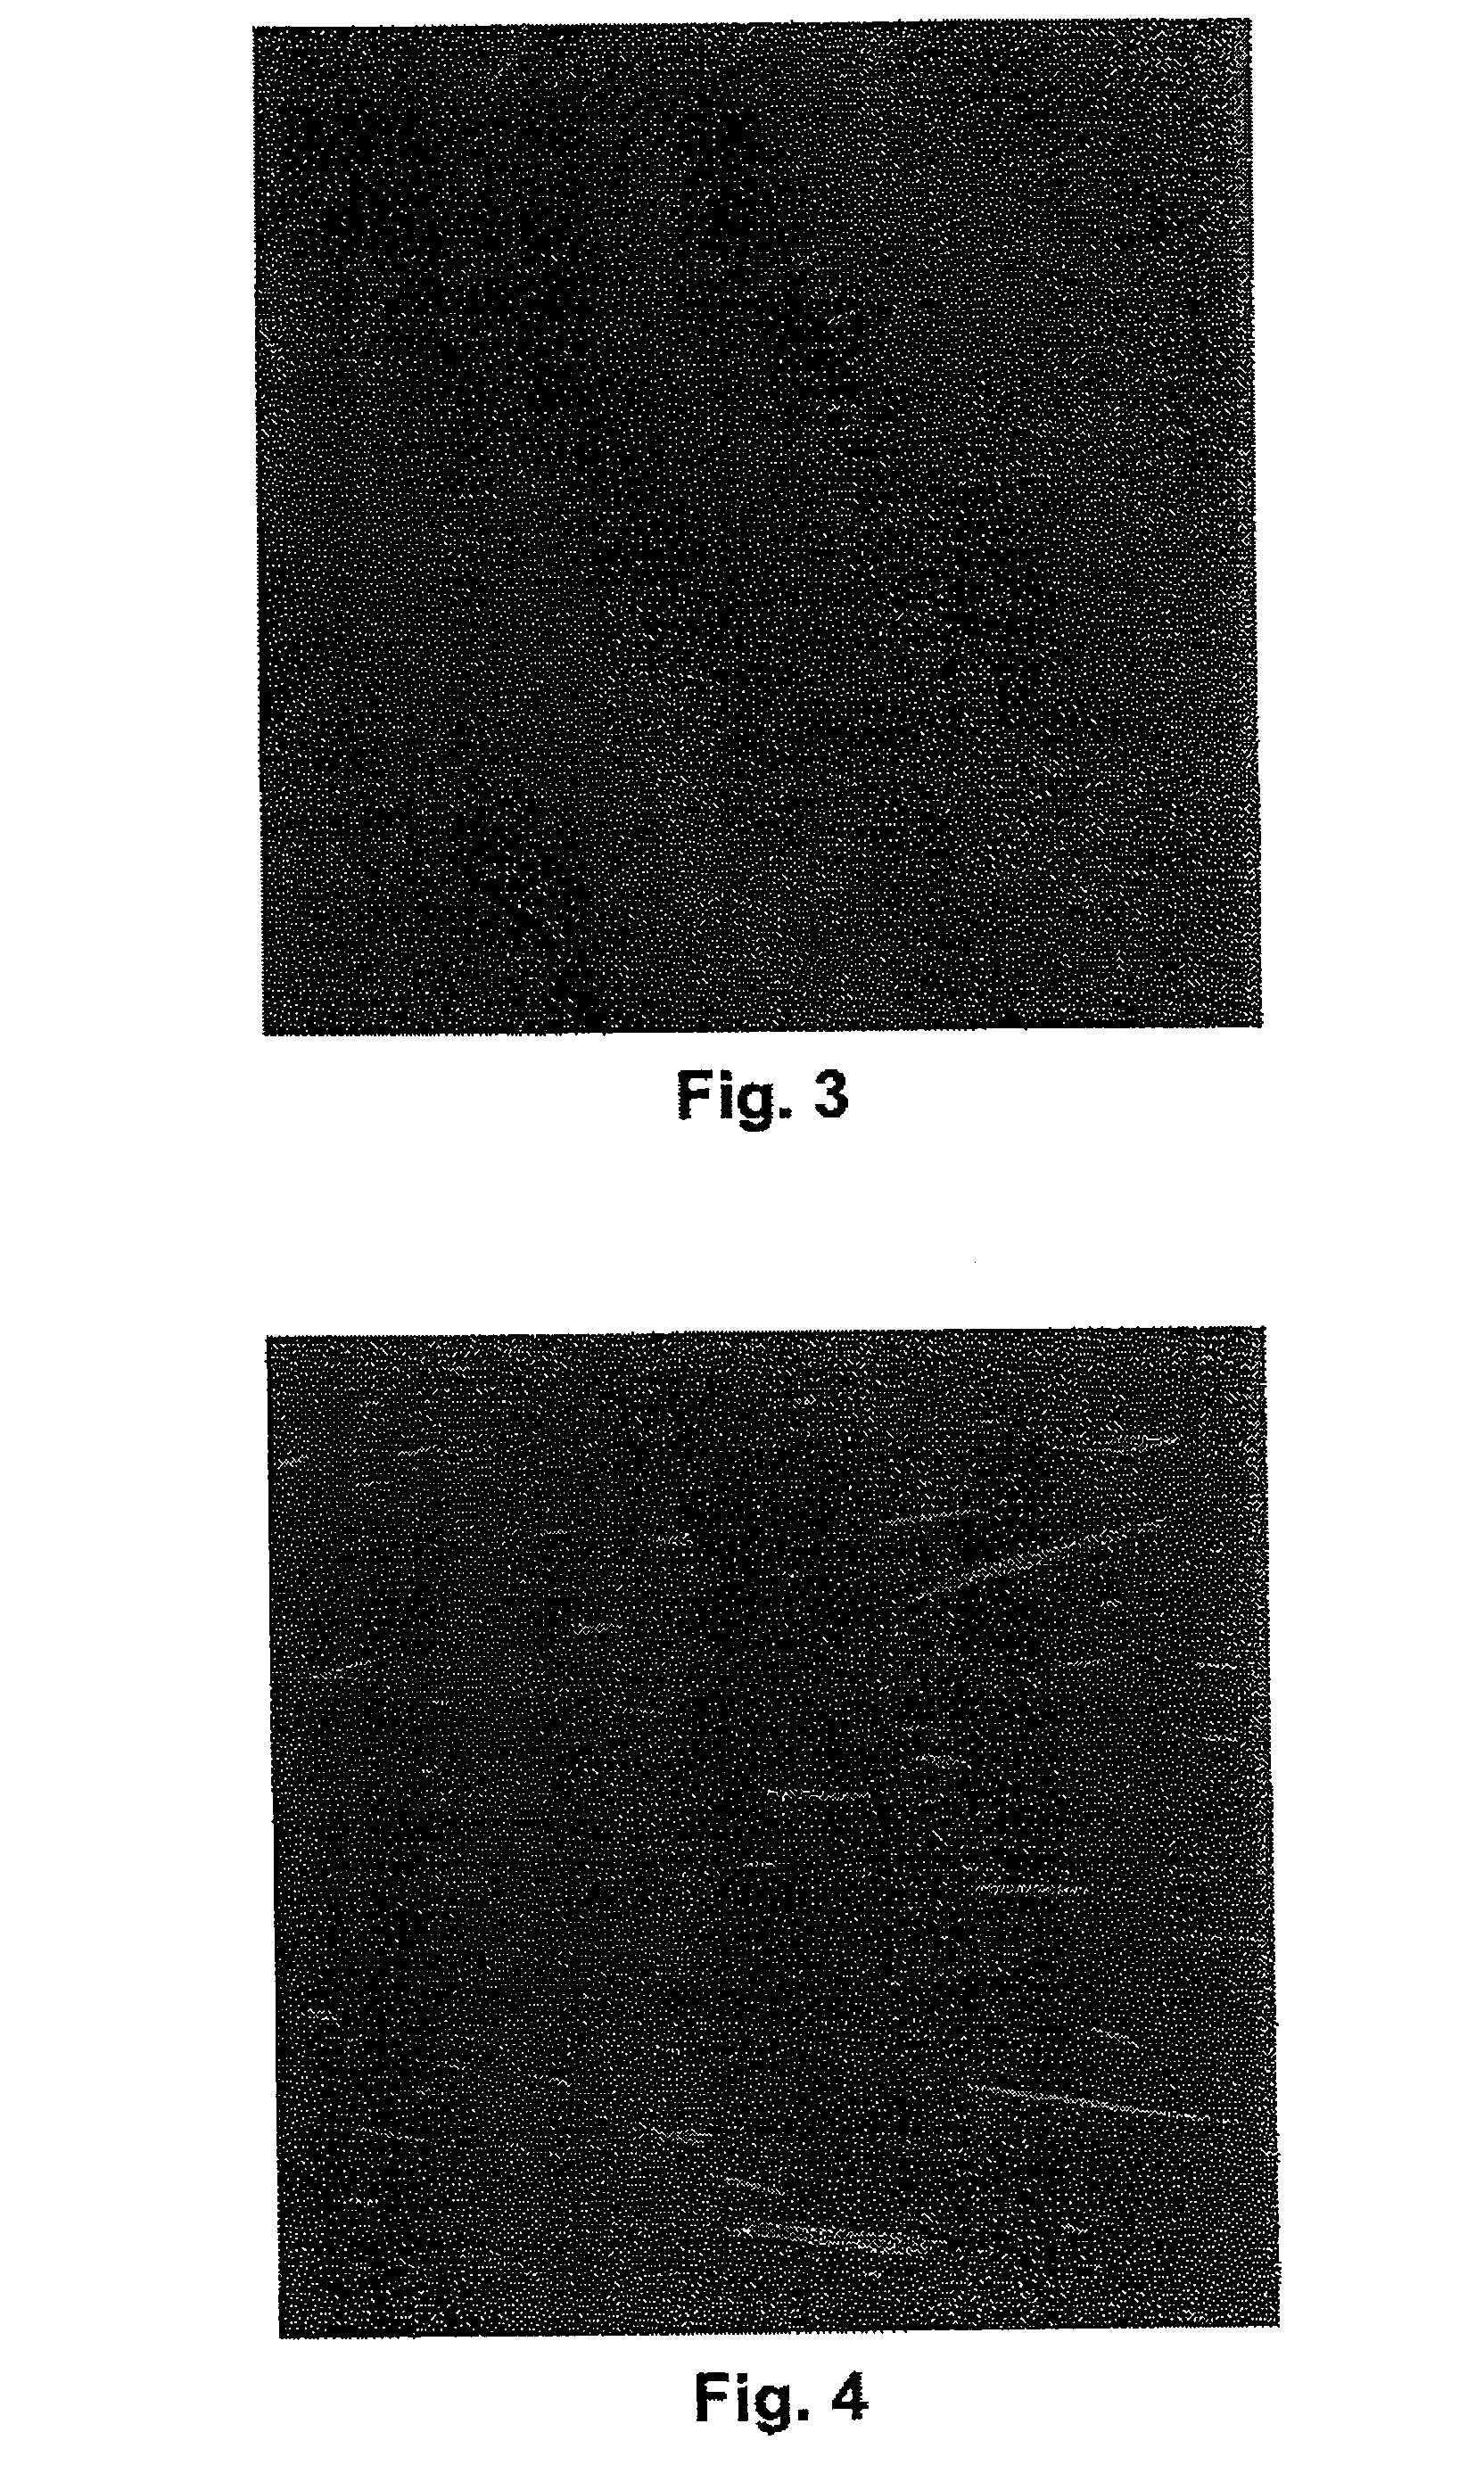 Polycrystalline Silicon Rod For Zone Reflecting And A Process For The Production Thereof